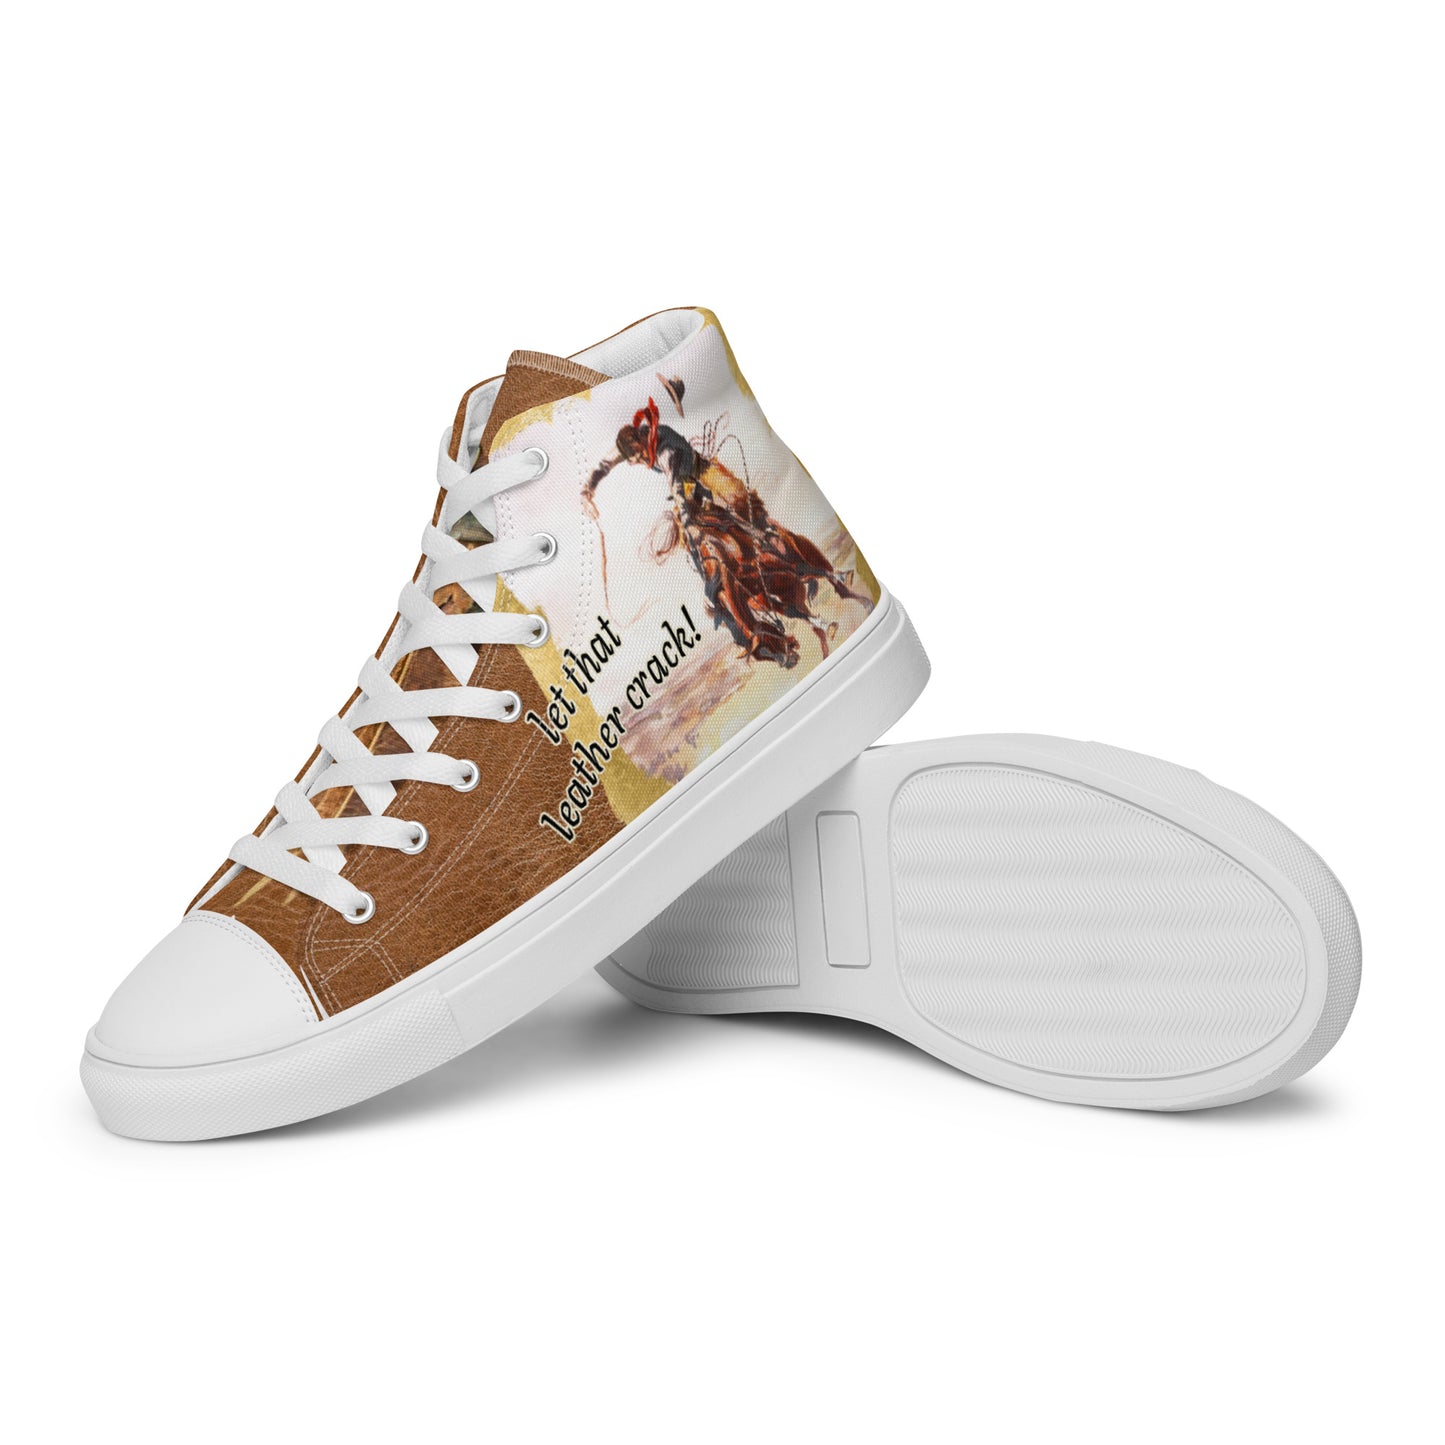 Let That Leather Crack Women’s high top canvas shoes - cowboy, cowgirl, high top, high top shoes, hightop, rodeo, shoes, western -  - Baha Ranch Western Wear